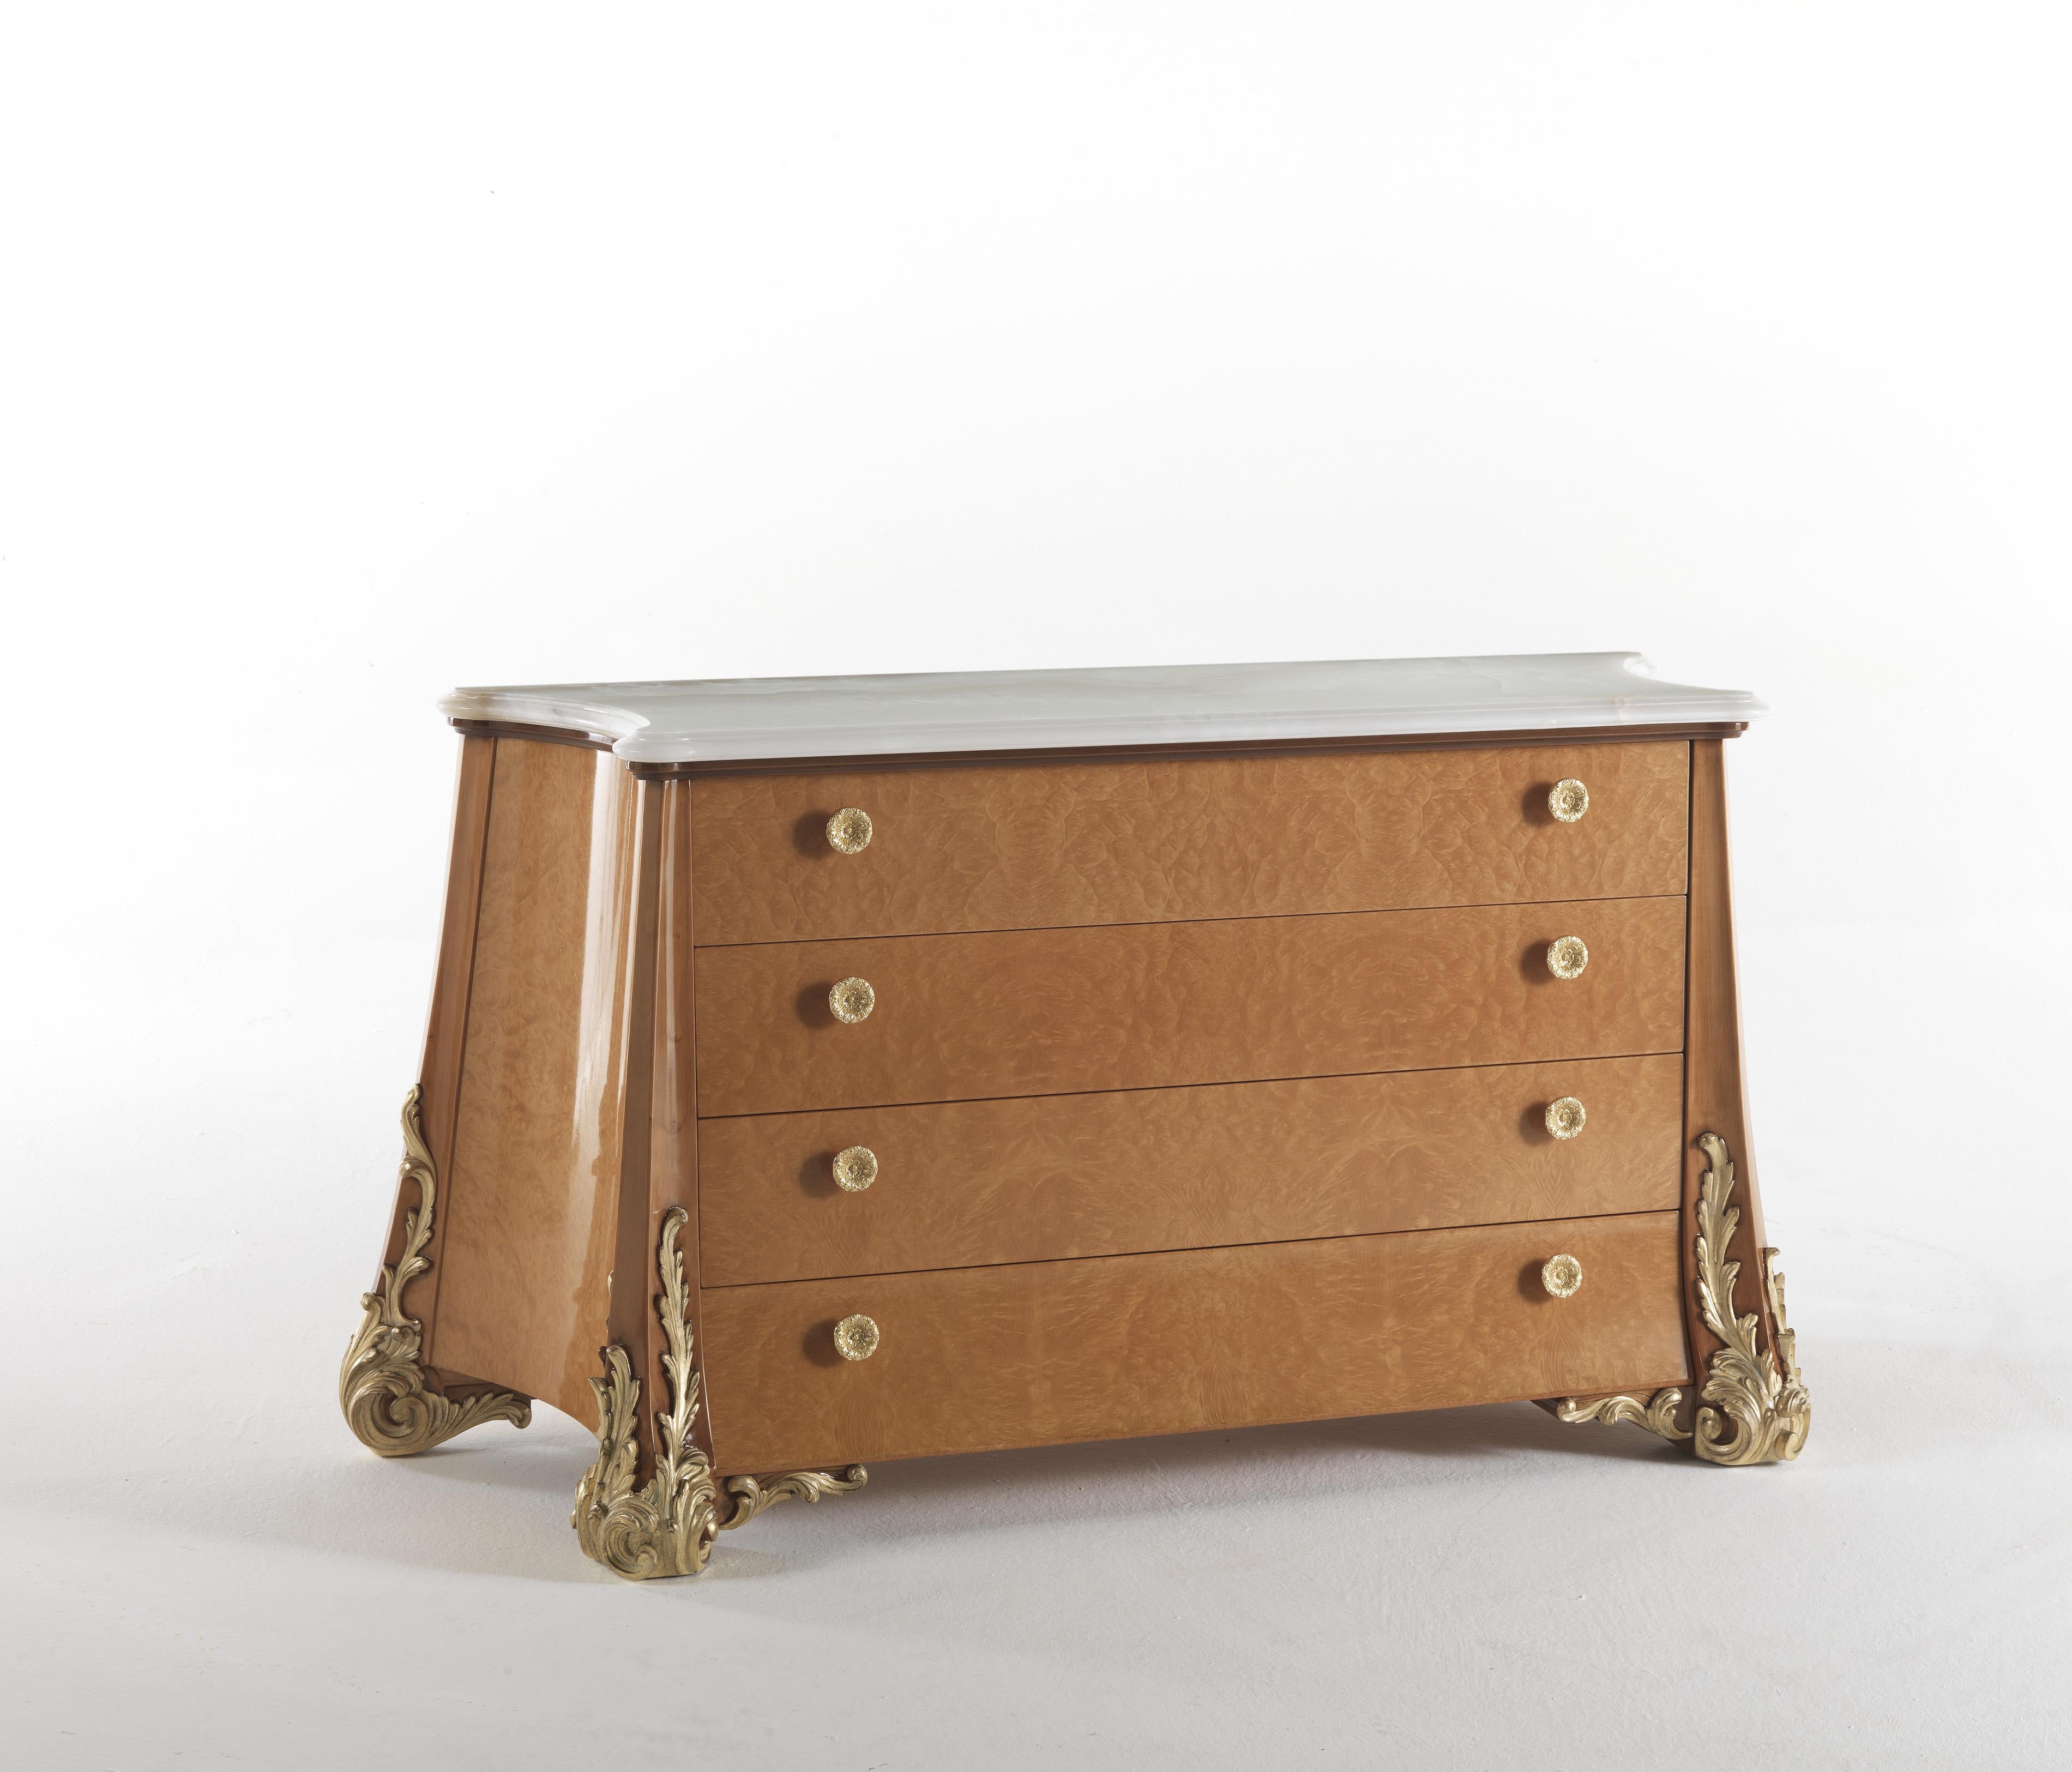 Sophie is a line of furniture with classical and sinuous lines. Featuring a wood structure with a glossy briar finish, the chest of drawers is enriched with hand-carved decorations and gold details that add a touch of timeless beauty to the entire